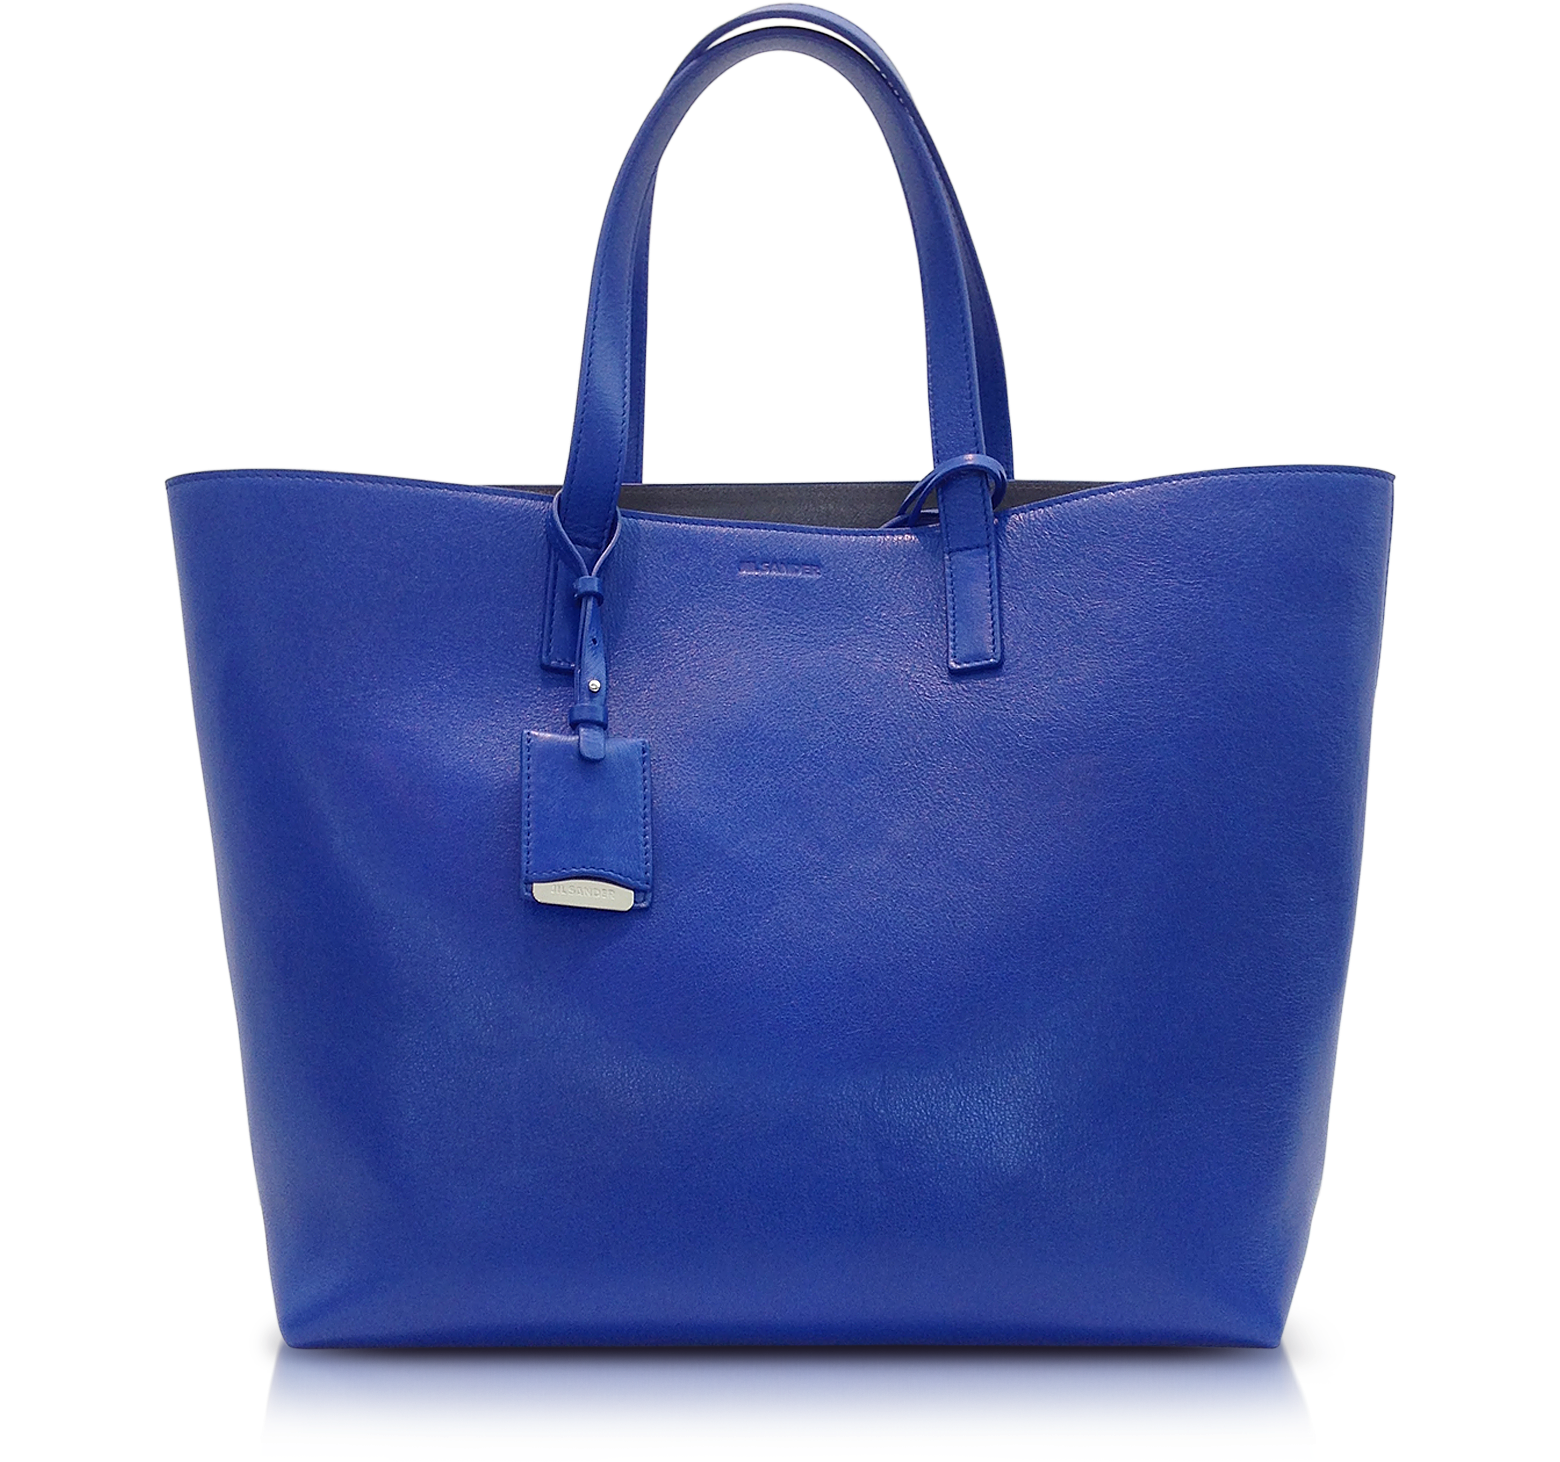 Jil Sander Blue Large Ibiza Leather Tote at FORZIERI